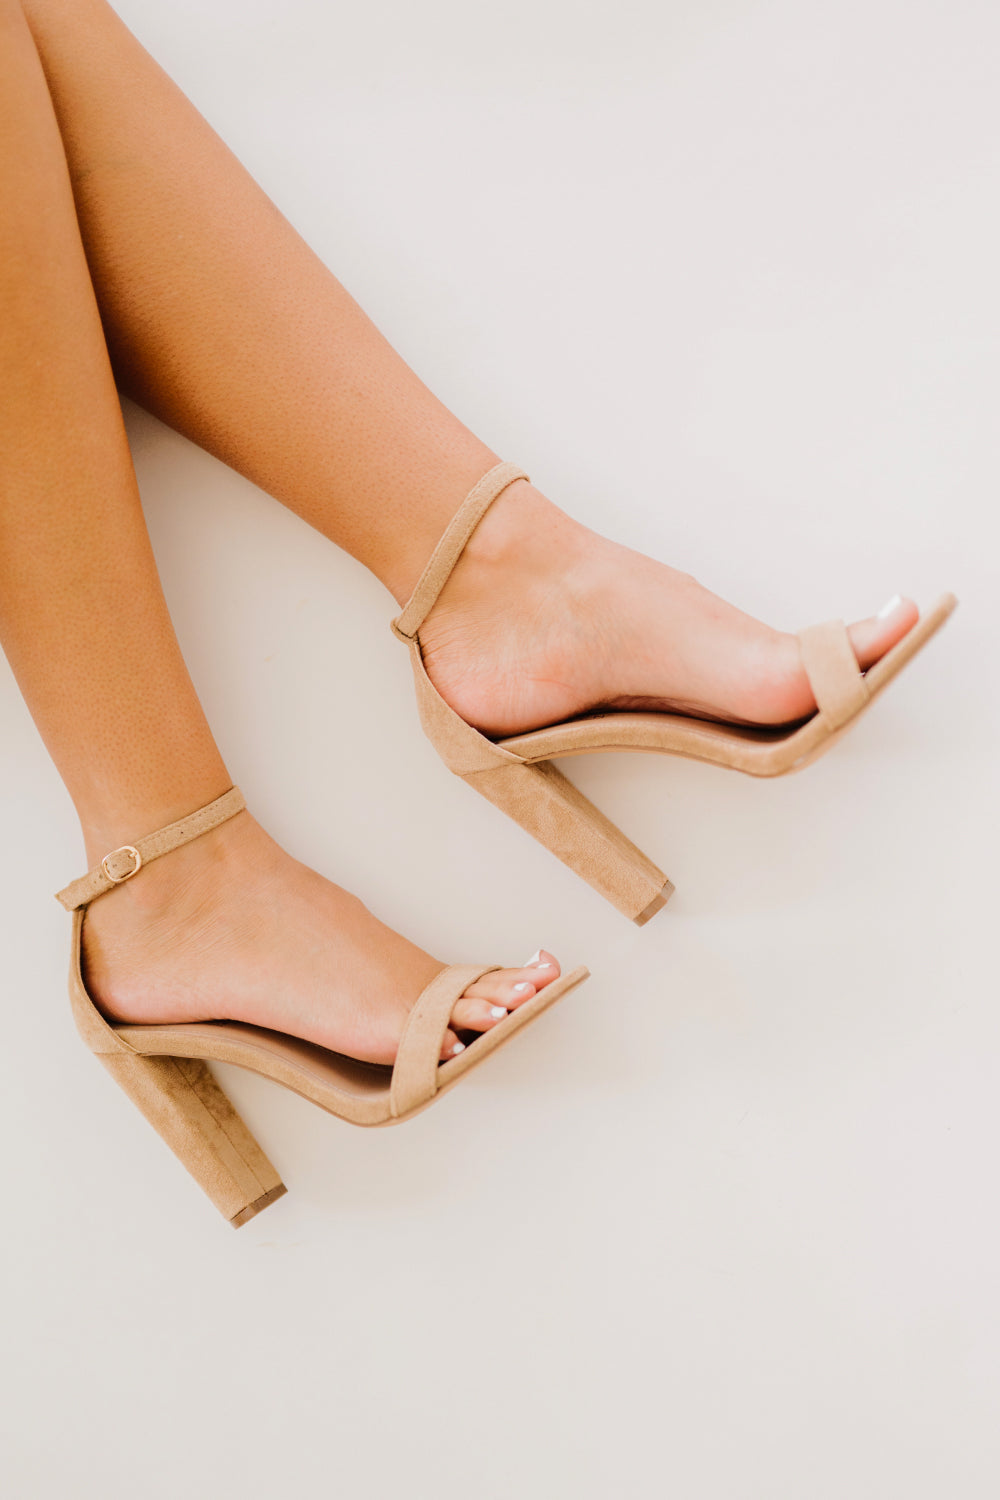 Tall Square Toe Block Heel Sandals - Taupe